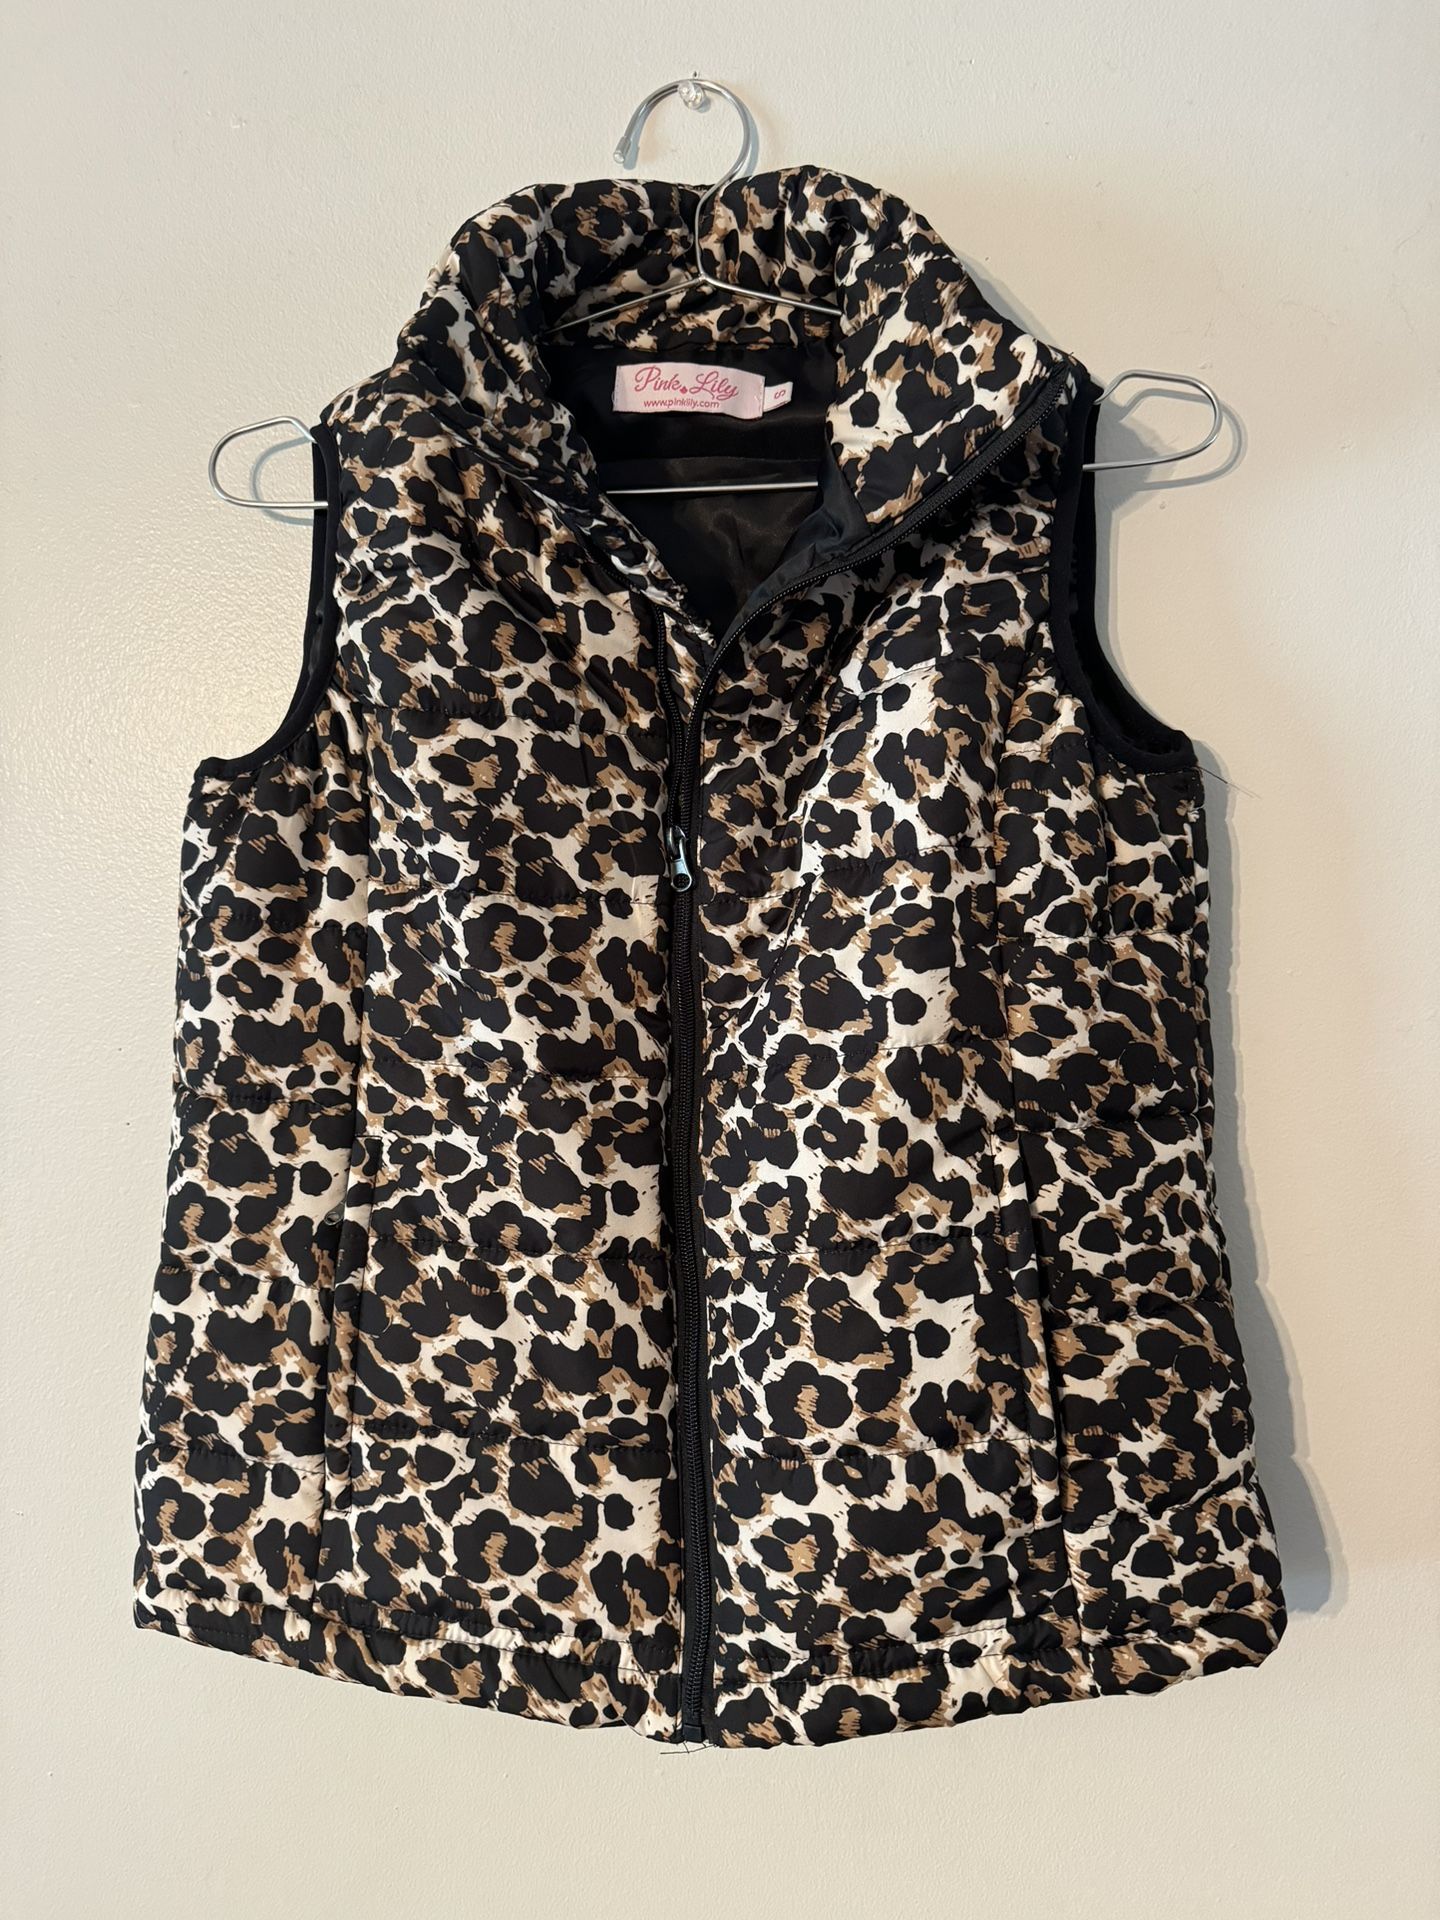 Pink Lily Women Brown Animal Print Puffer Vest Size Small